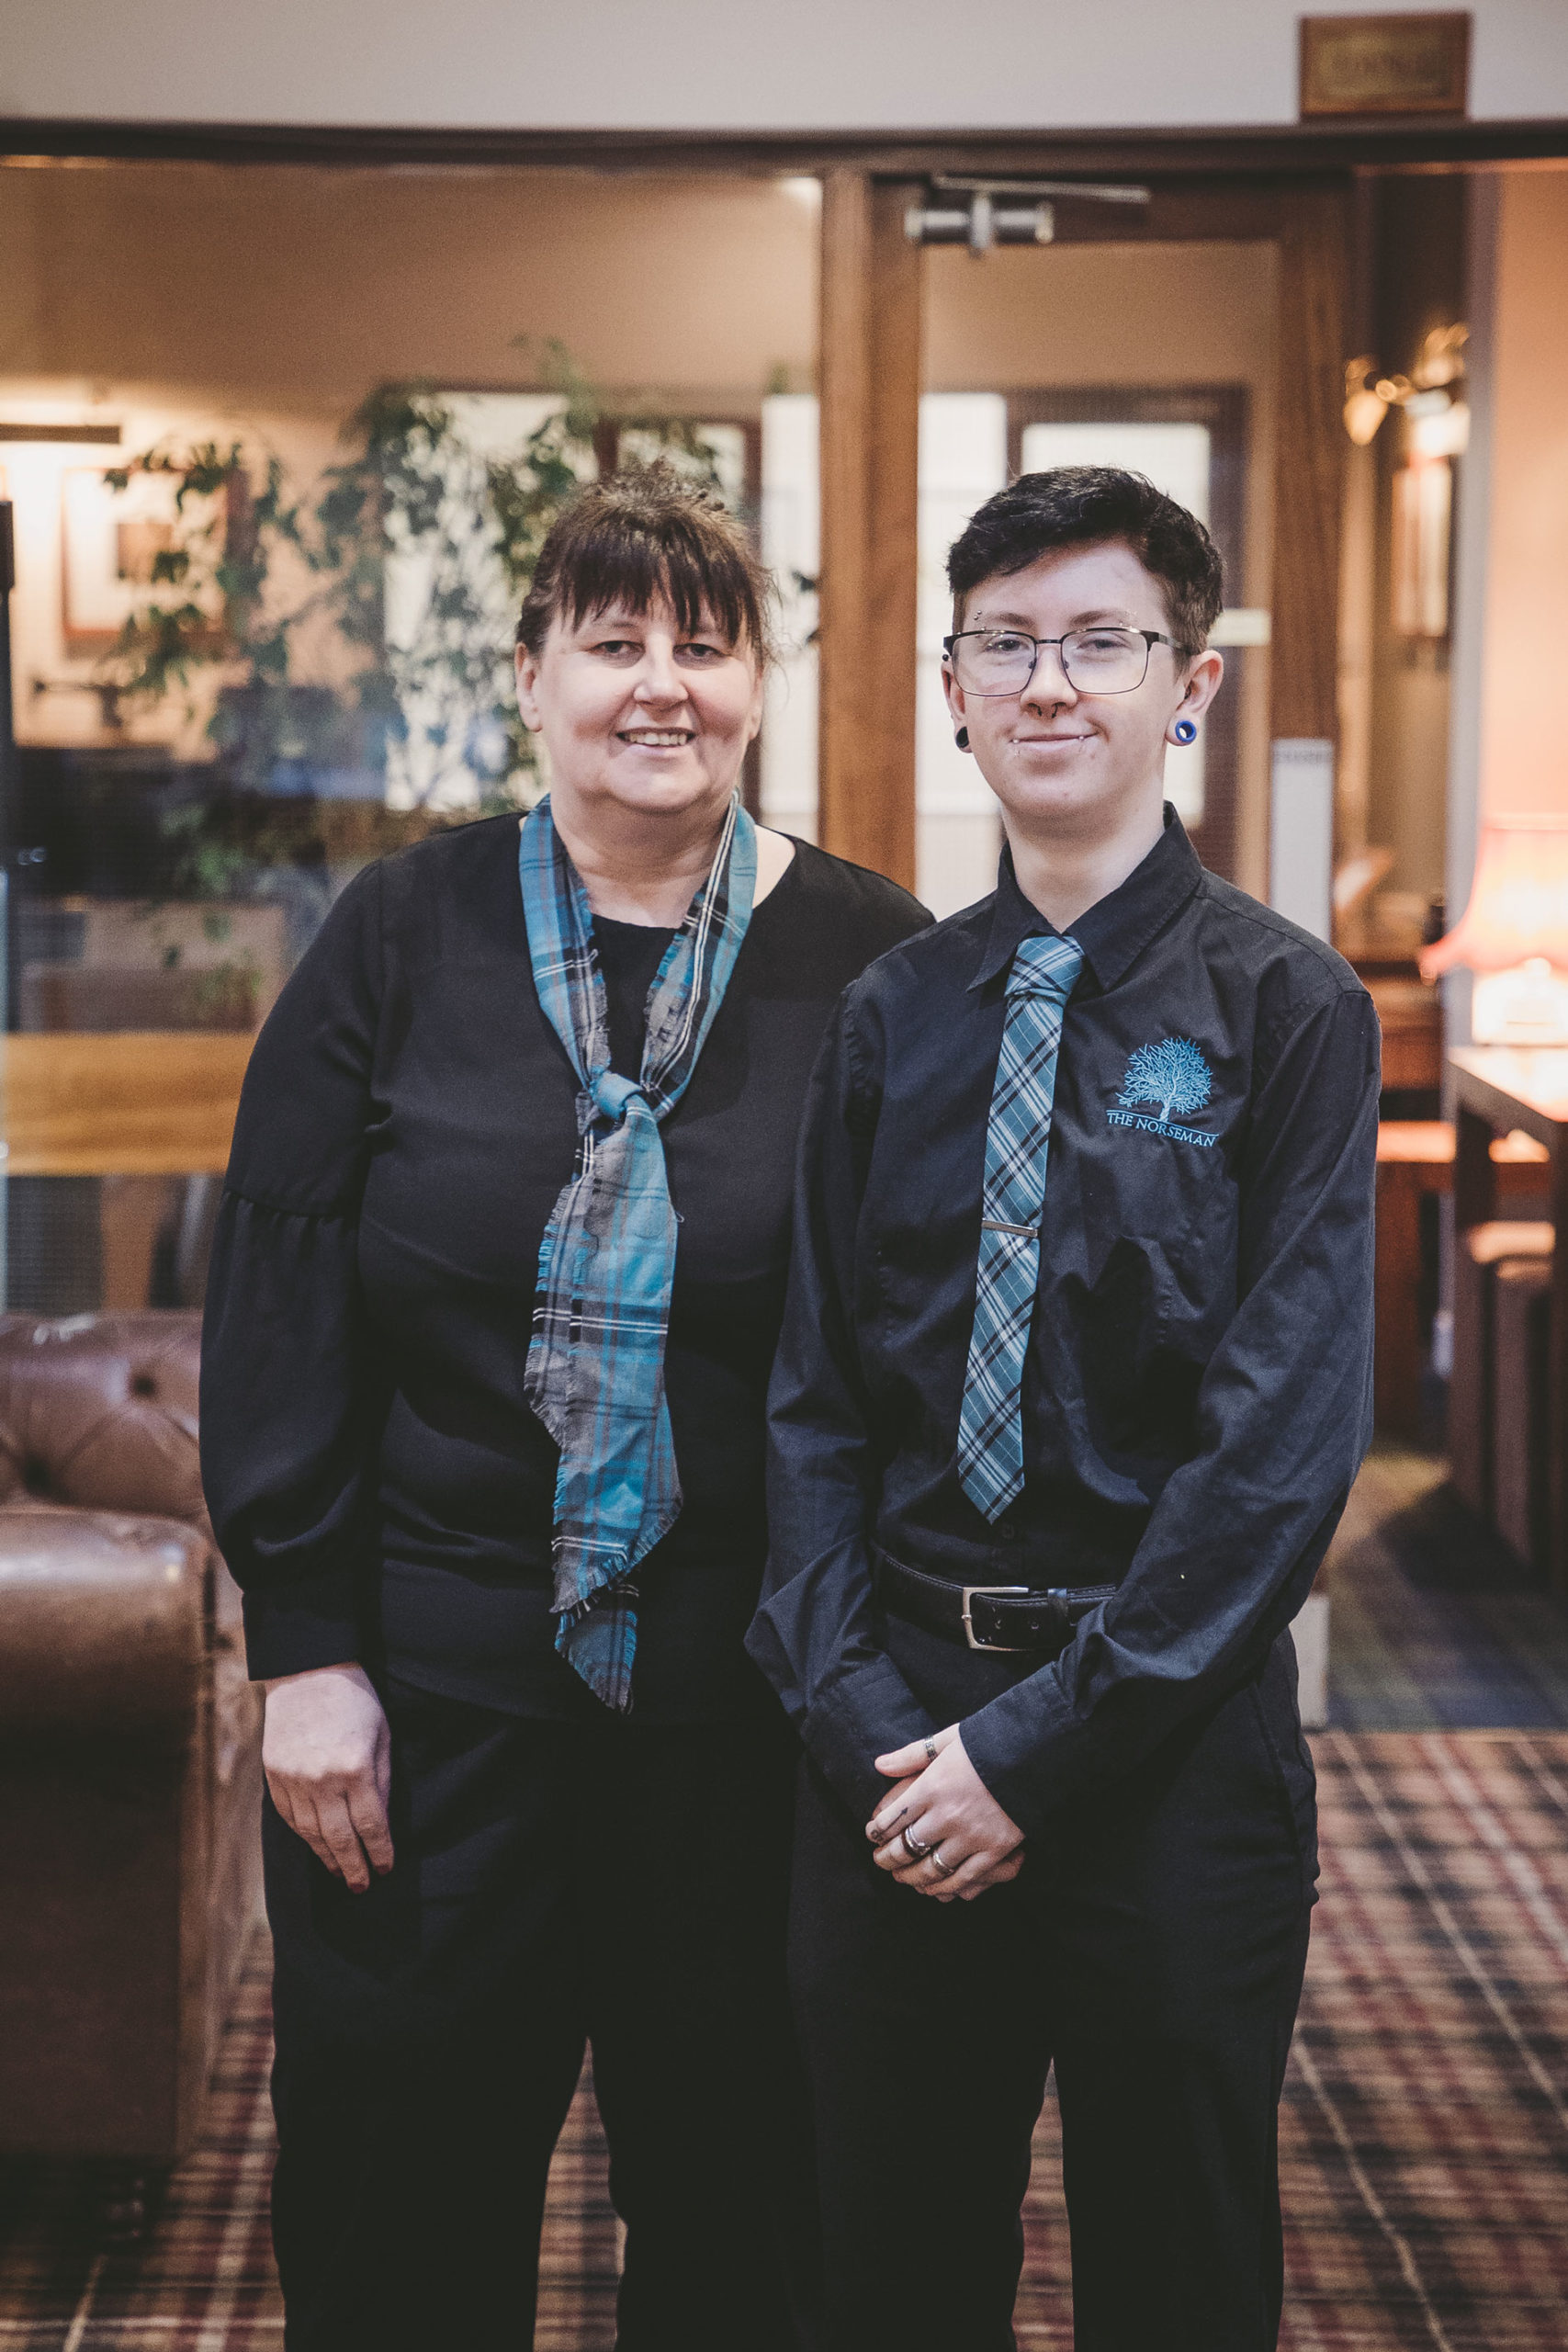 Riley Miller Apprentice Trainee Manager, studying an SVQ certification in Modern Apprentice Hotel Leadership with Sharon Barclay, Assistant Manager The Caithness Collection